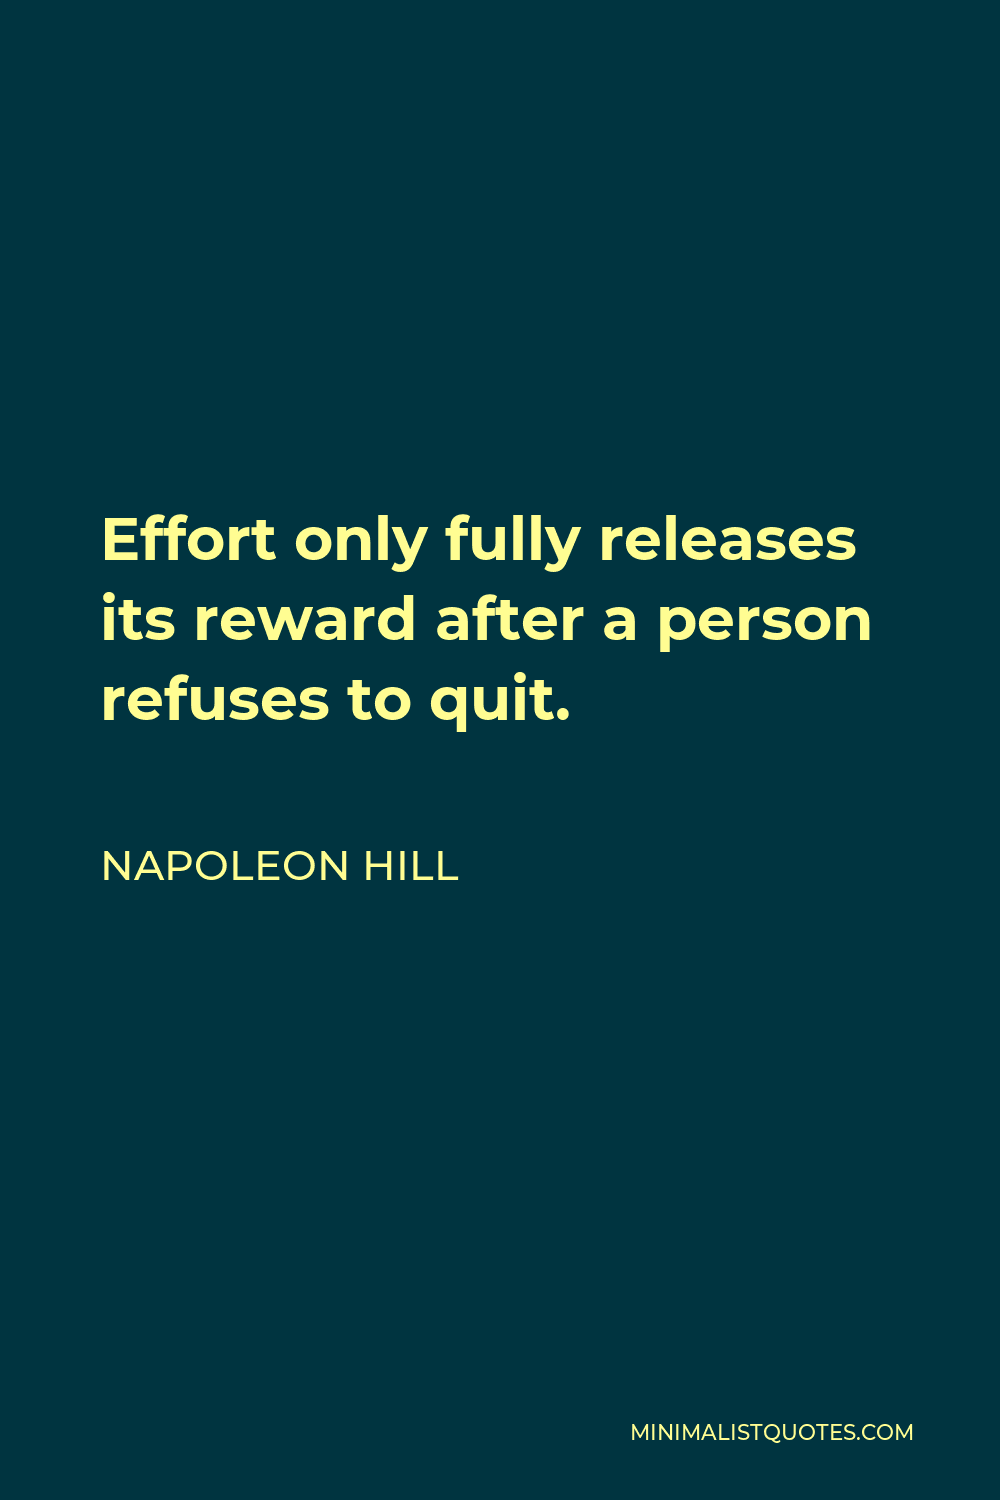 Napoleon Hill Quote - Effort only fully releases its reward after a person refuses to quit.